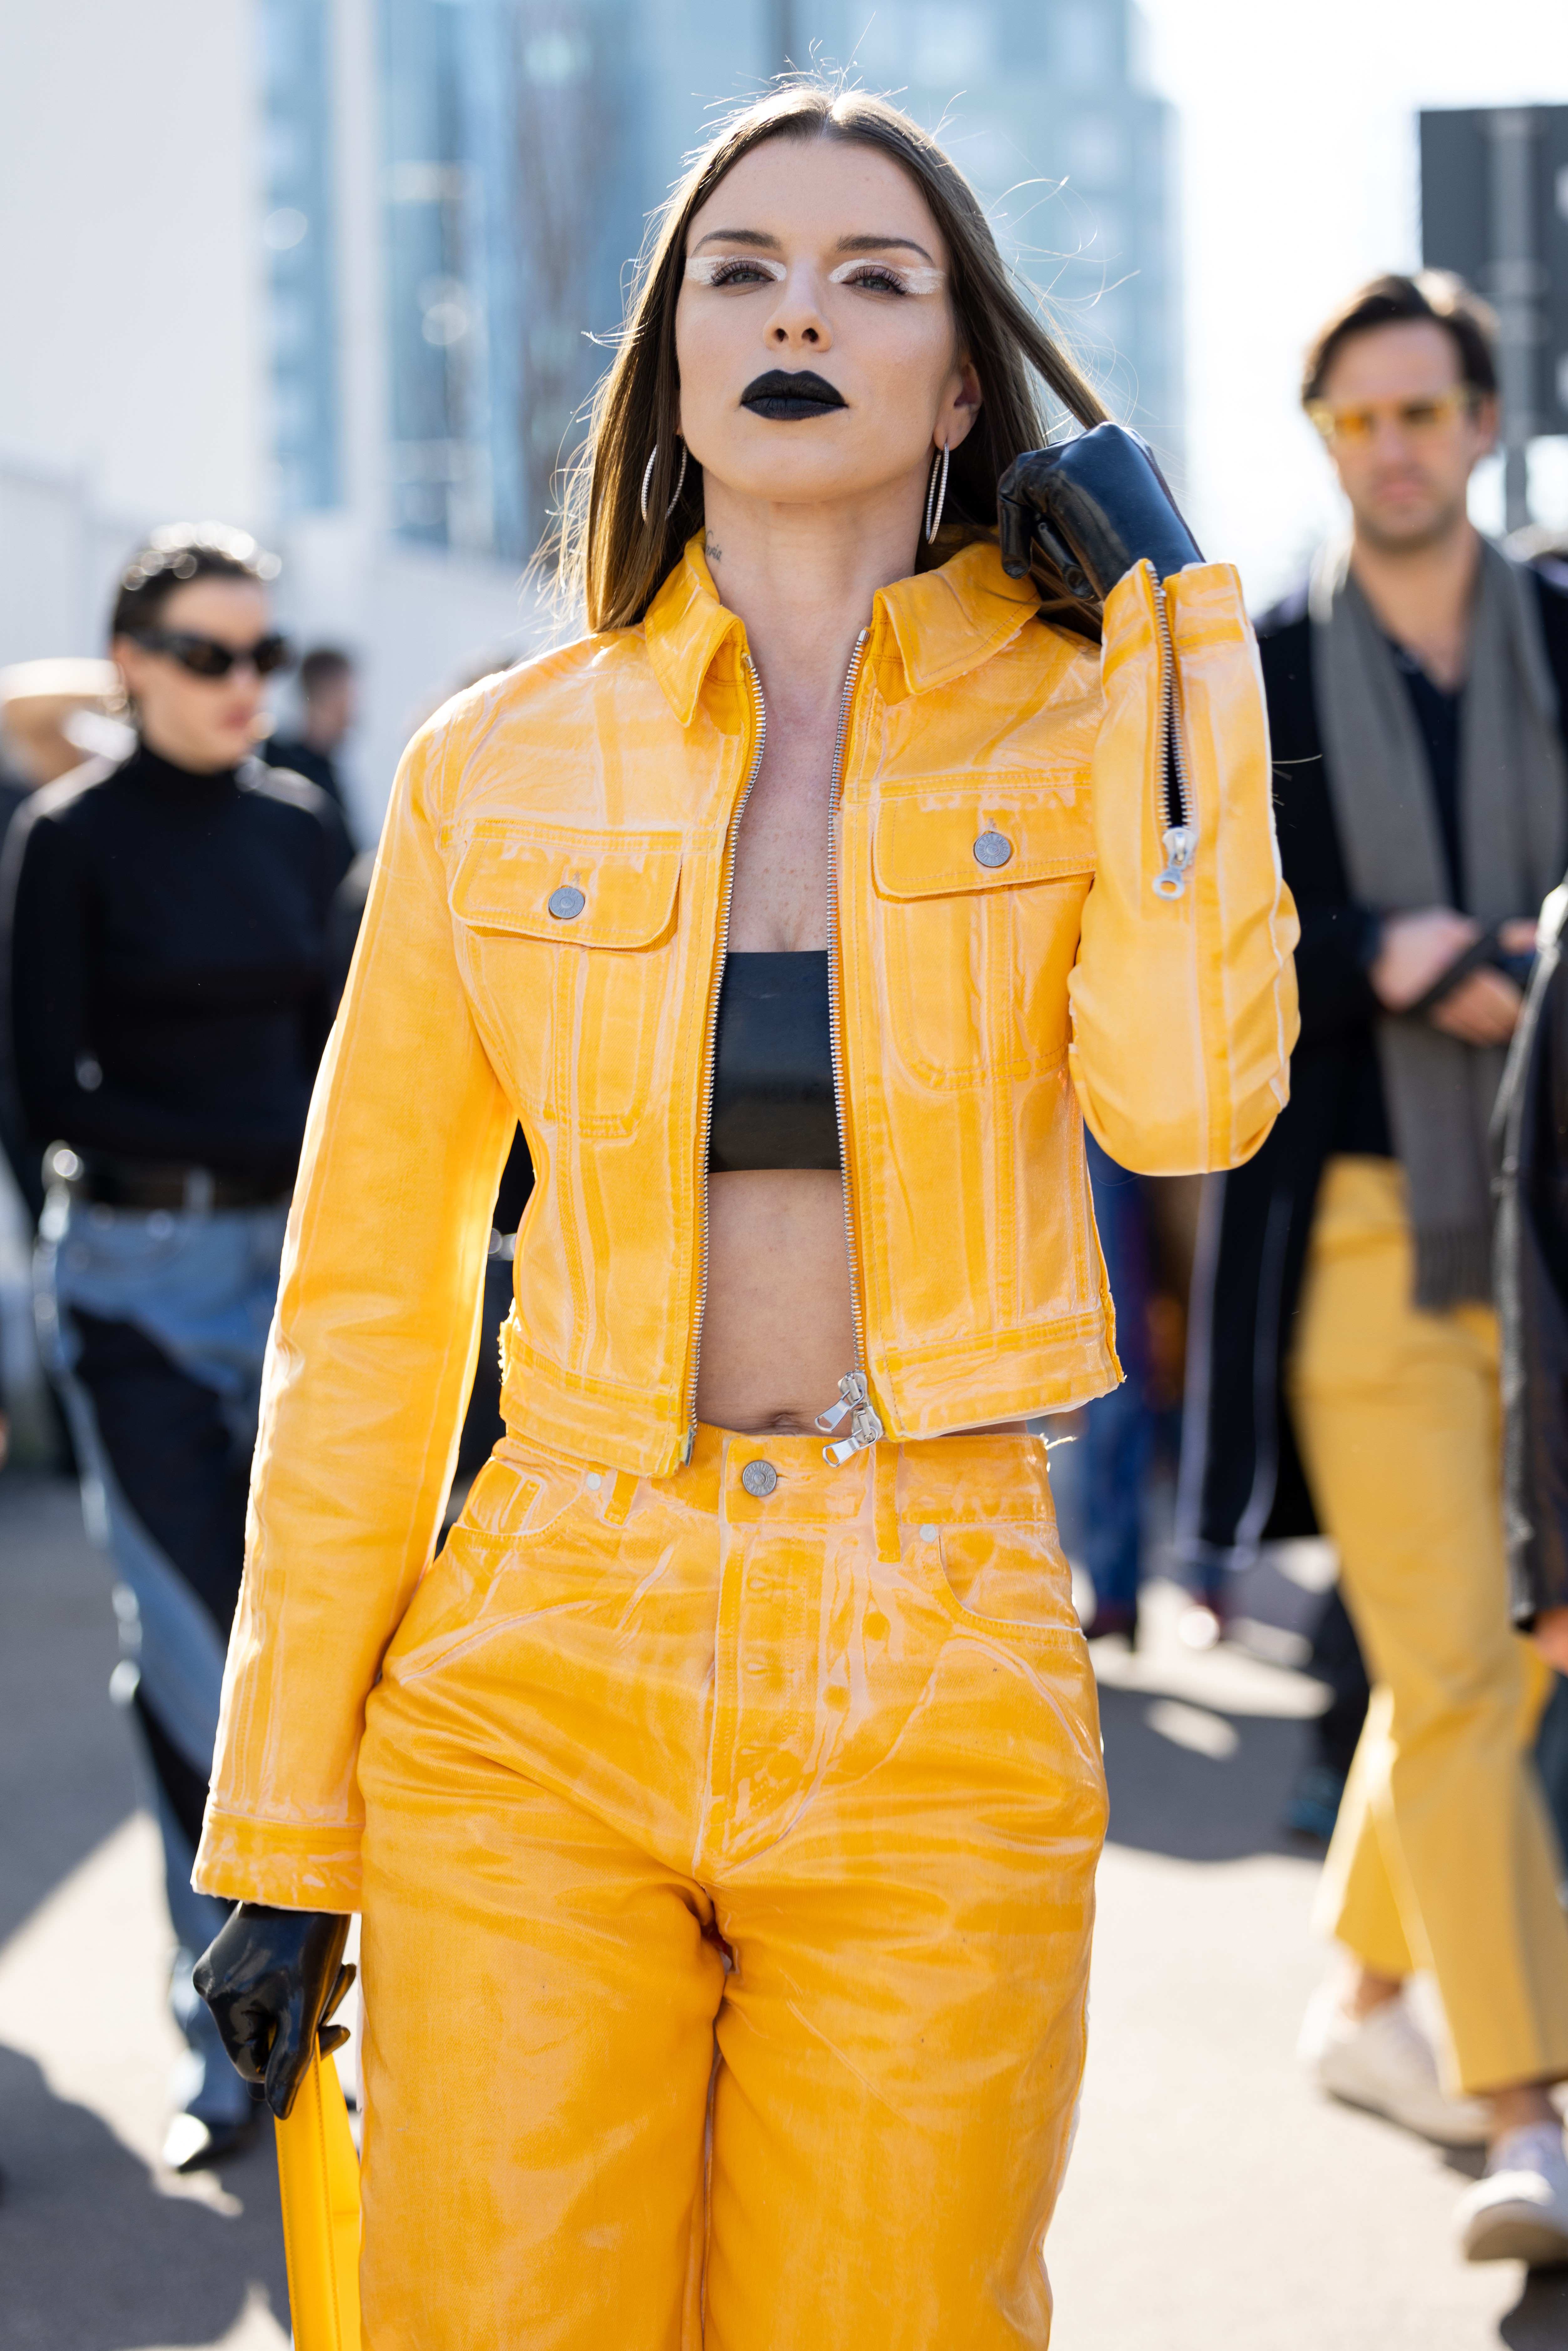 MILAN, ITALY - FEBRUARY 23: Julia Fox seen ahead of the Diesel fashion show wearing yellow denim pants and jacket during the Milan Fashion Week Fall/Winter 2022/2023 on February 23, 2022 in Milan, Italy. (Photo by Valentina Frugiuele/Getty Images) (Foto: Getty Images)